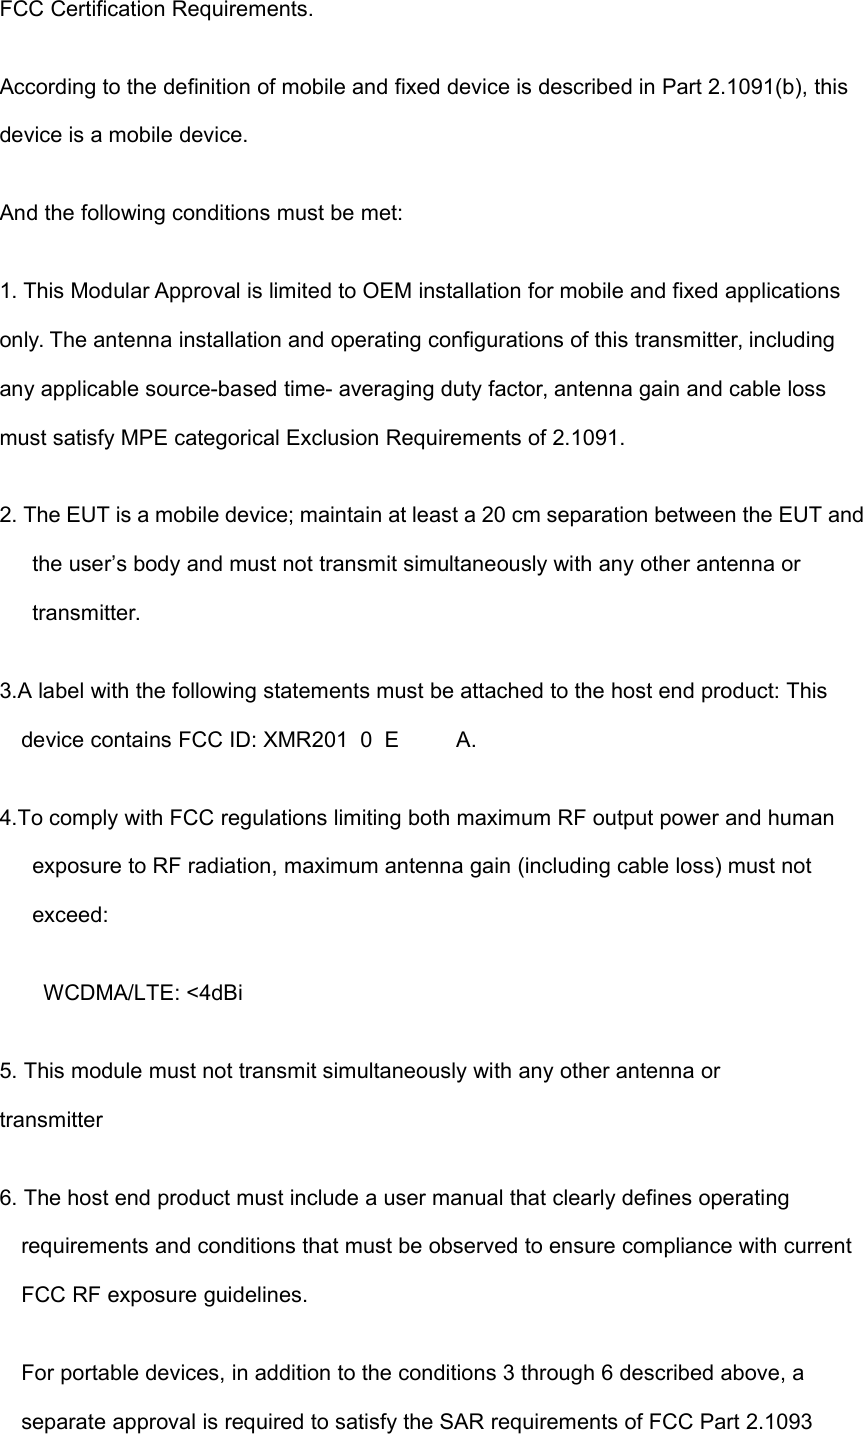 FCC Certification Requirements.According to the definition of mobile and fixed device is described in Part 2.1091(b), thisdevice is a mobile device.And the following conditions must be met:1. This Modular Approval is limited to OEM installation for mobile and fixed applicationsonly. The antenna installation and operating configurations of this transmitter, includingany applicable source-based time- averaging duty factor, antenna gain and cable lossmust satisfy MPE categorical Exclusion Requirements of 2.1091.2. The EUT is a mobile device; maintain at least a 20 cm separation between the EUT andthe user’s body and must not transmit simultaneously with any other antenna ortransmitter.3.A label with the following statements must be attached to the host end product: Thisdevice contains FCC ID: XMR2010E*1A.4.To comply with FCC regulations limiting both maximum RF output power and humanexposure to RF radiation, maximum antenna gain (including cable loss) must notexceed:WCDMA/LTE: &lt;4dBi5. This module must not transmit simultaneously with any other antenna ortransmitter6. The host end product must include a user manual that clearly defines operatingrequirements and conditions that must be observed to ensure compliance with currentFCC RF exposure guidelines.For portable devices, in addition to the conditions 3 through 6 described above, aseparate approval is required to satisfy the SAR requirements of FCC Part 2.1093